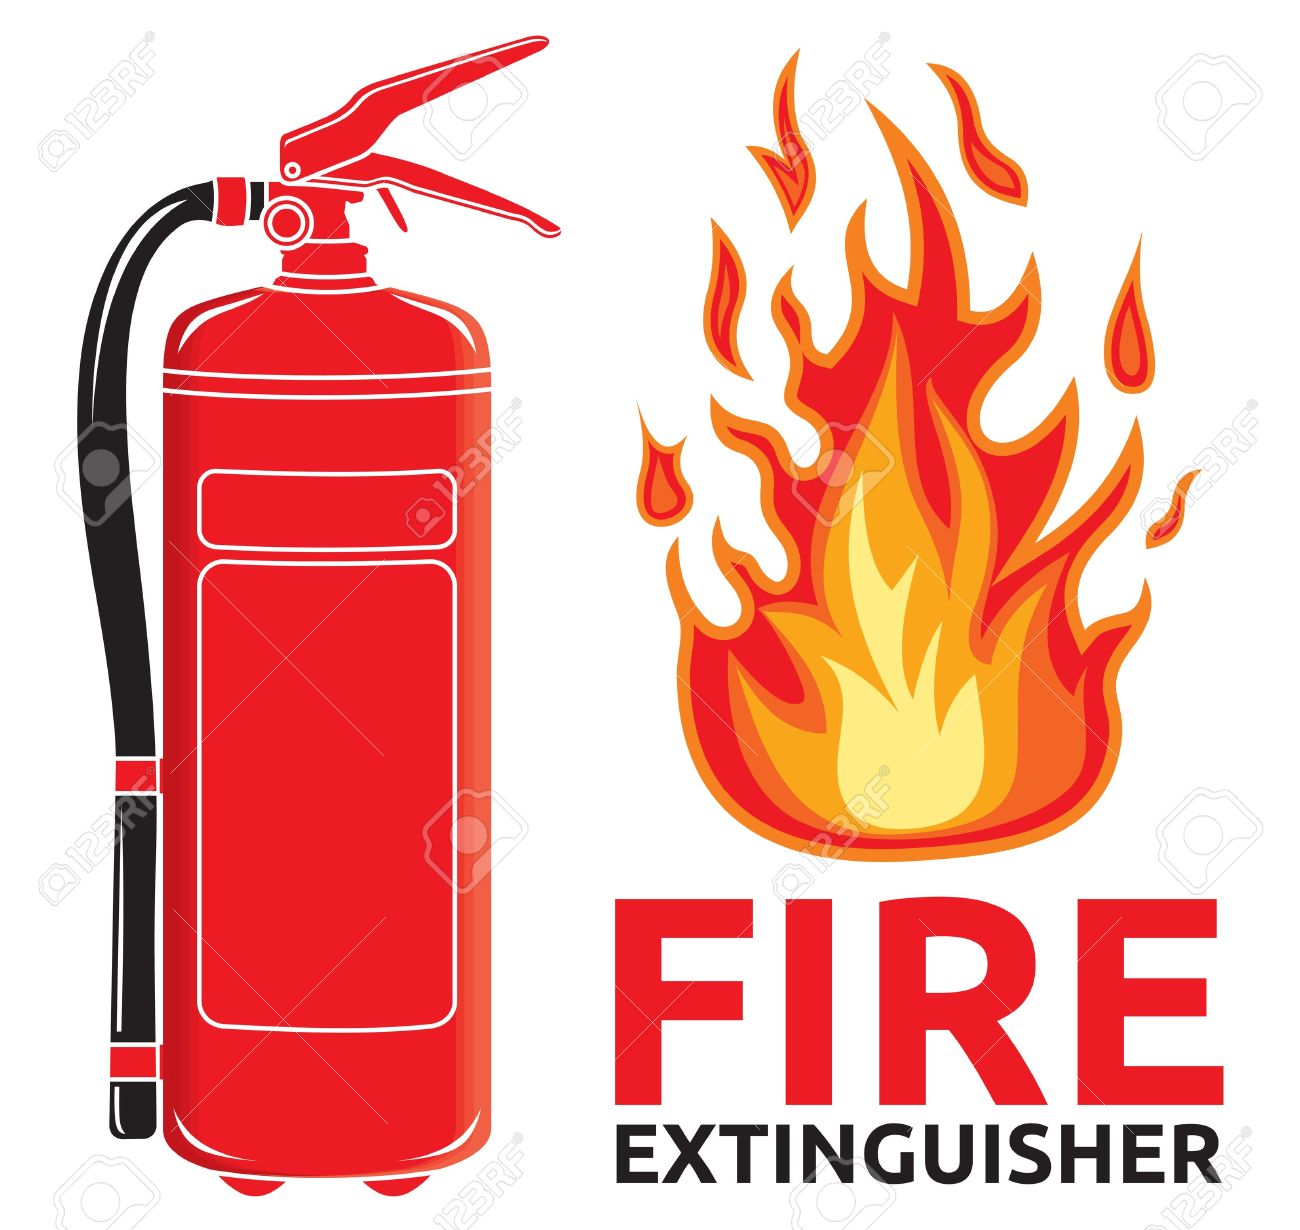 Fire Extinguisher Market Report, Global Industry Overview, Growth Rate, Trends and Forecast 2024 - IMARC Group